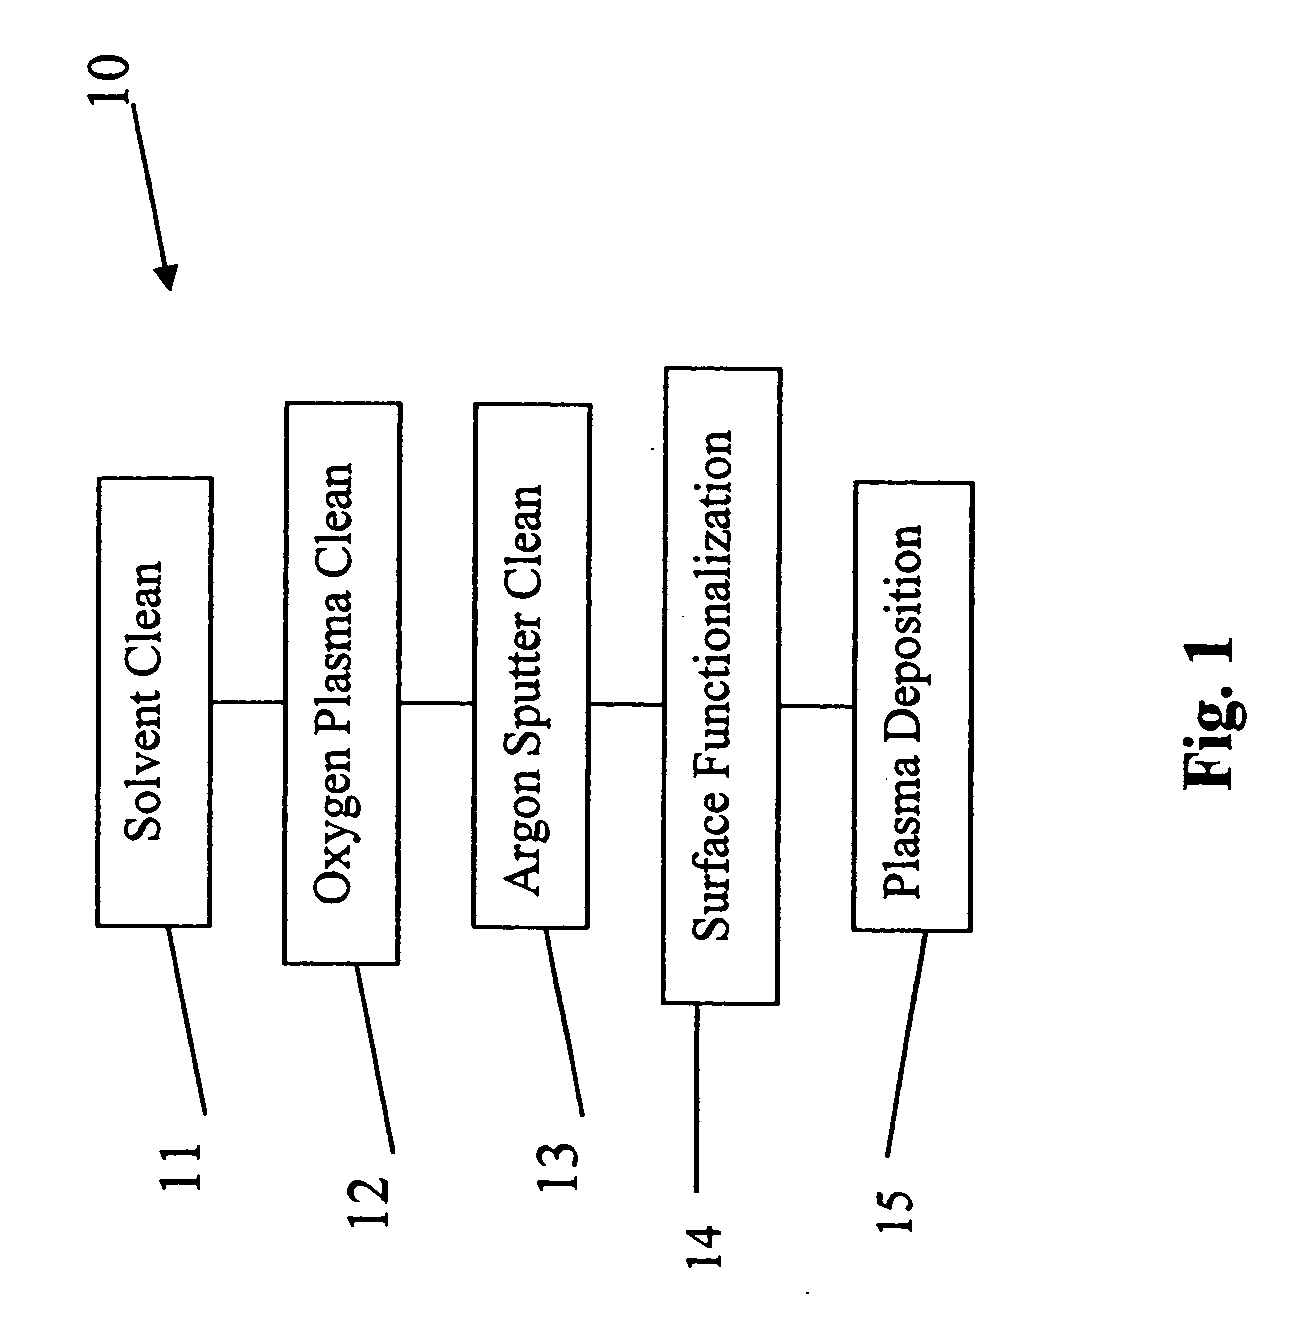 Method of forming a polymer layer on a metal surface